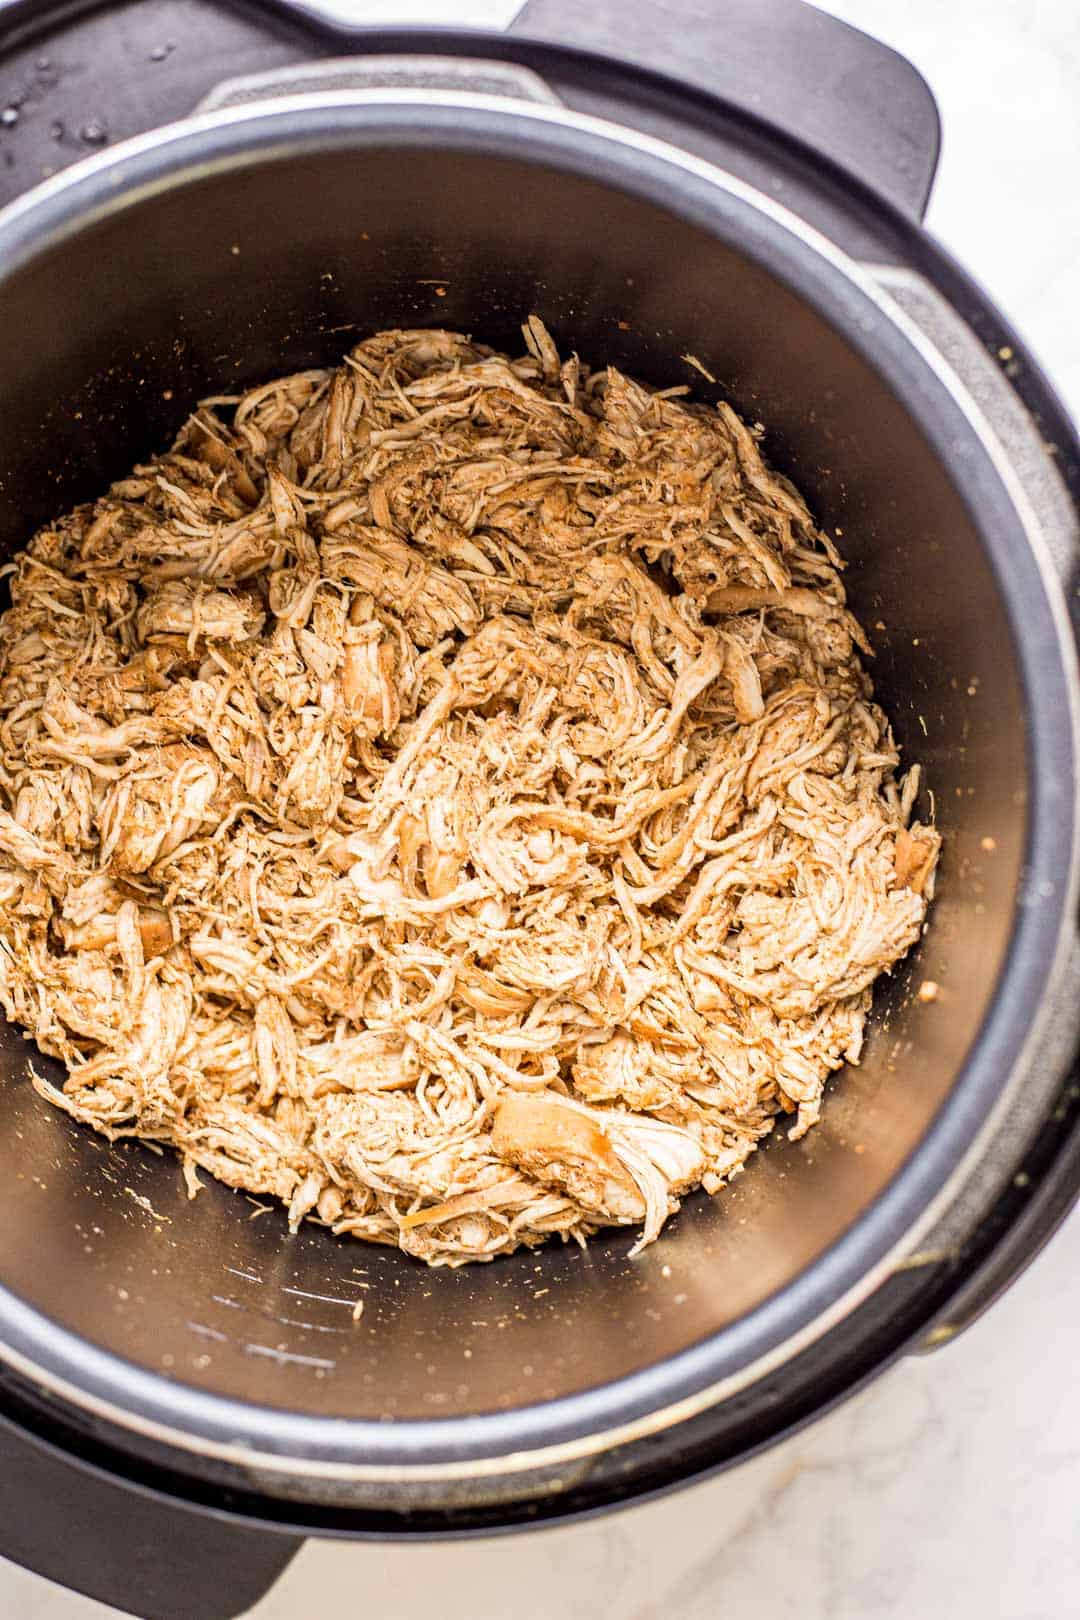 Shredded Chicken in a slow cooker